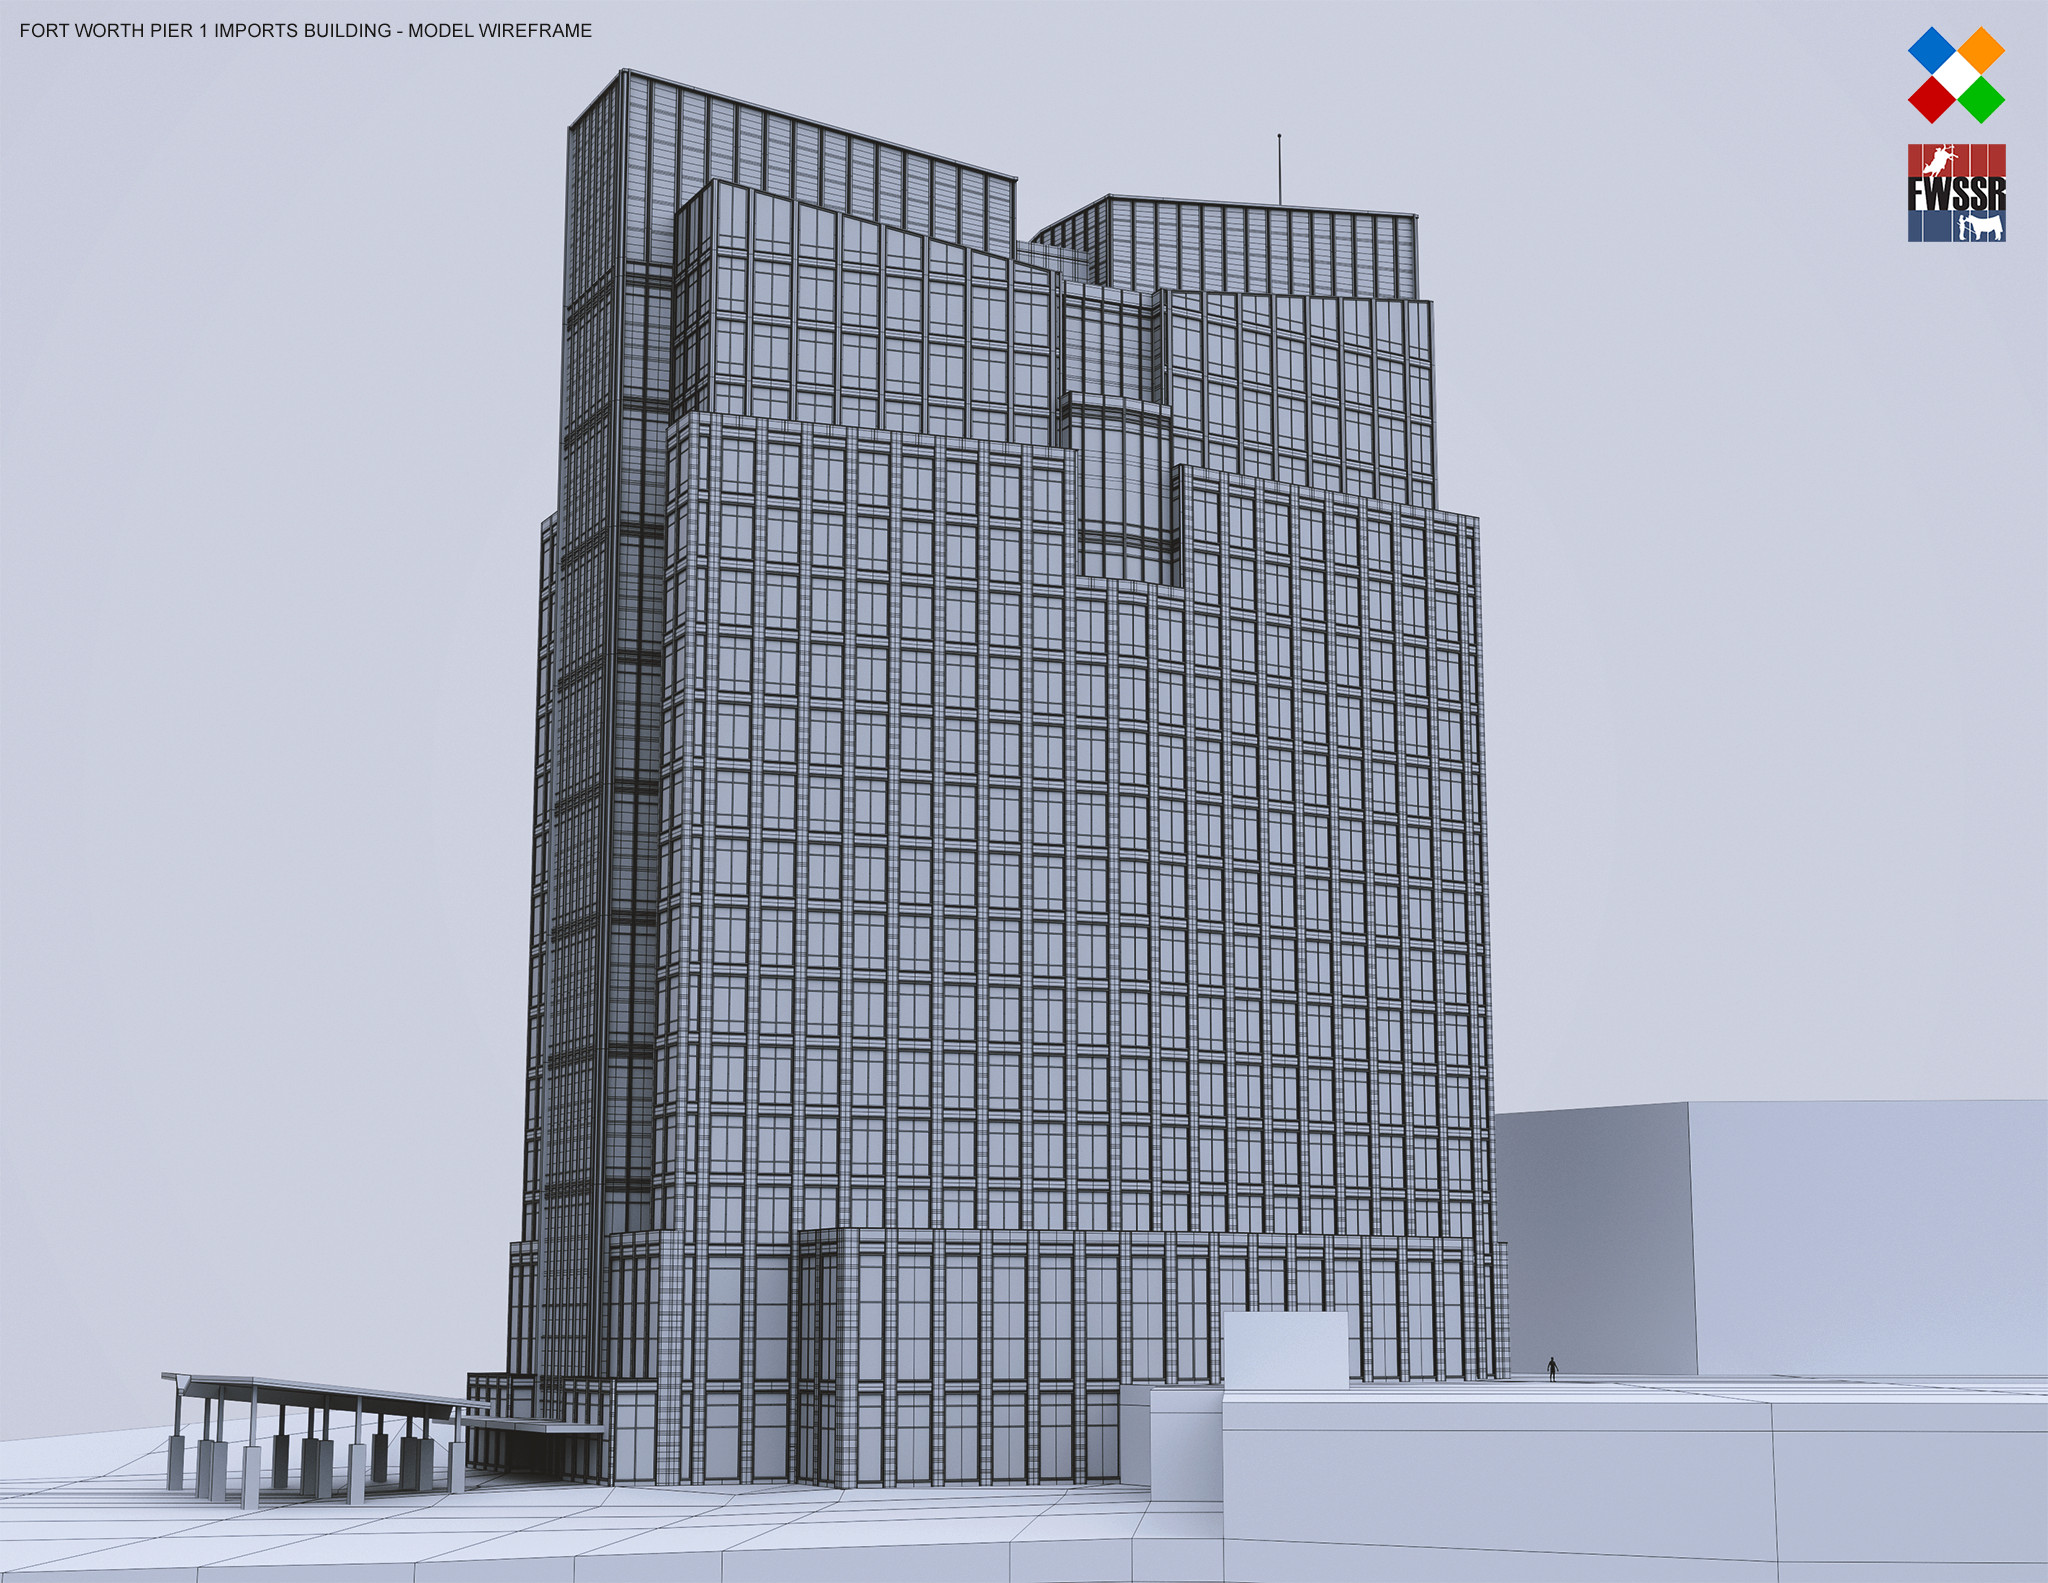 Fort Worth Pier 1 Imports Building Wireframe Render 